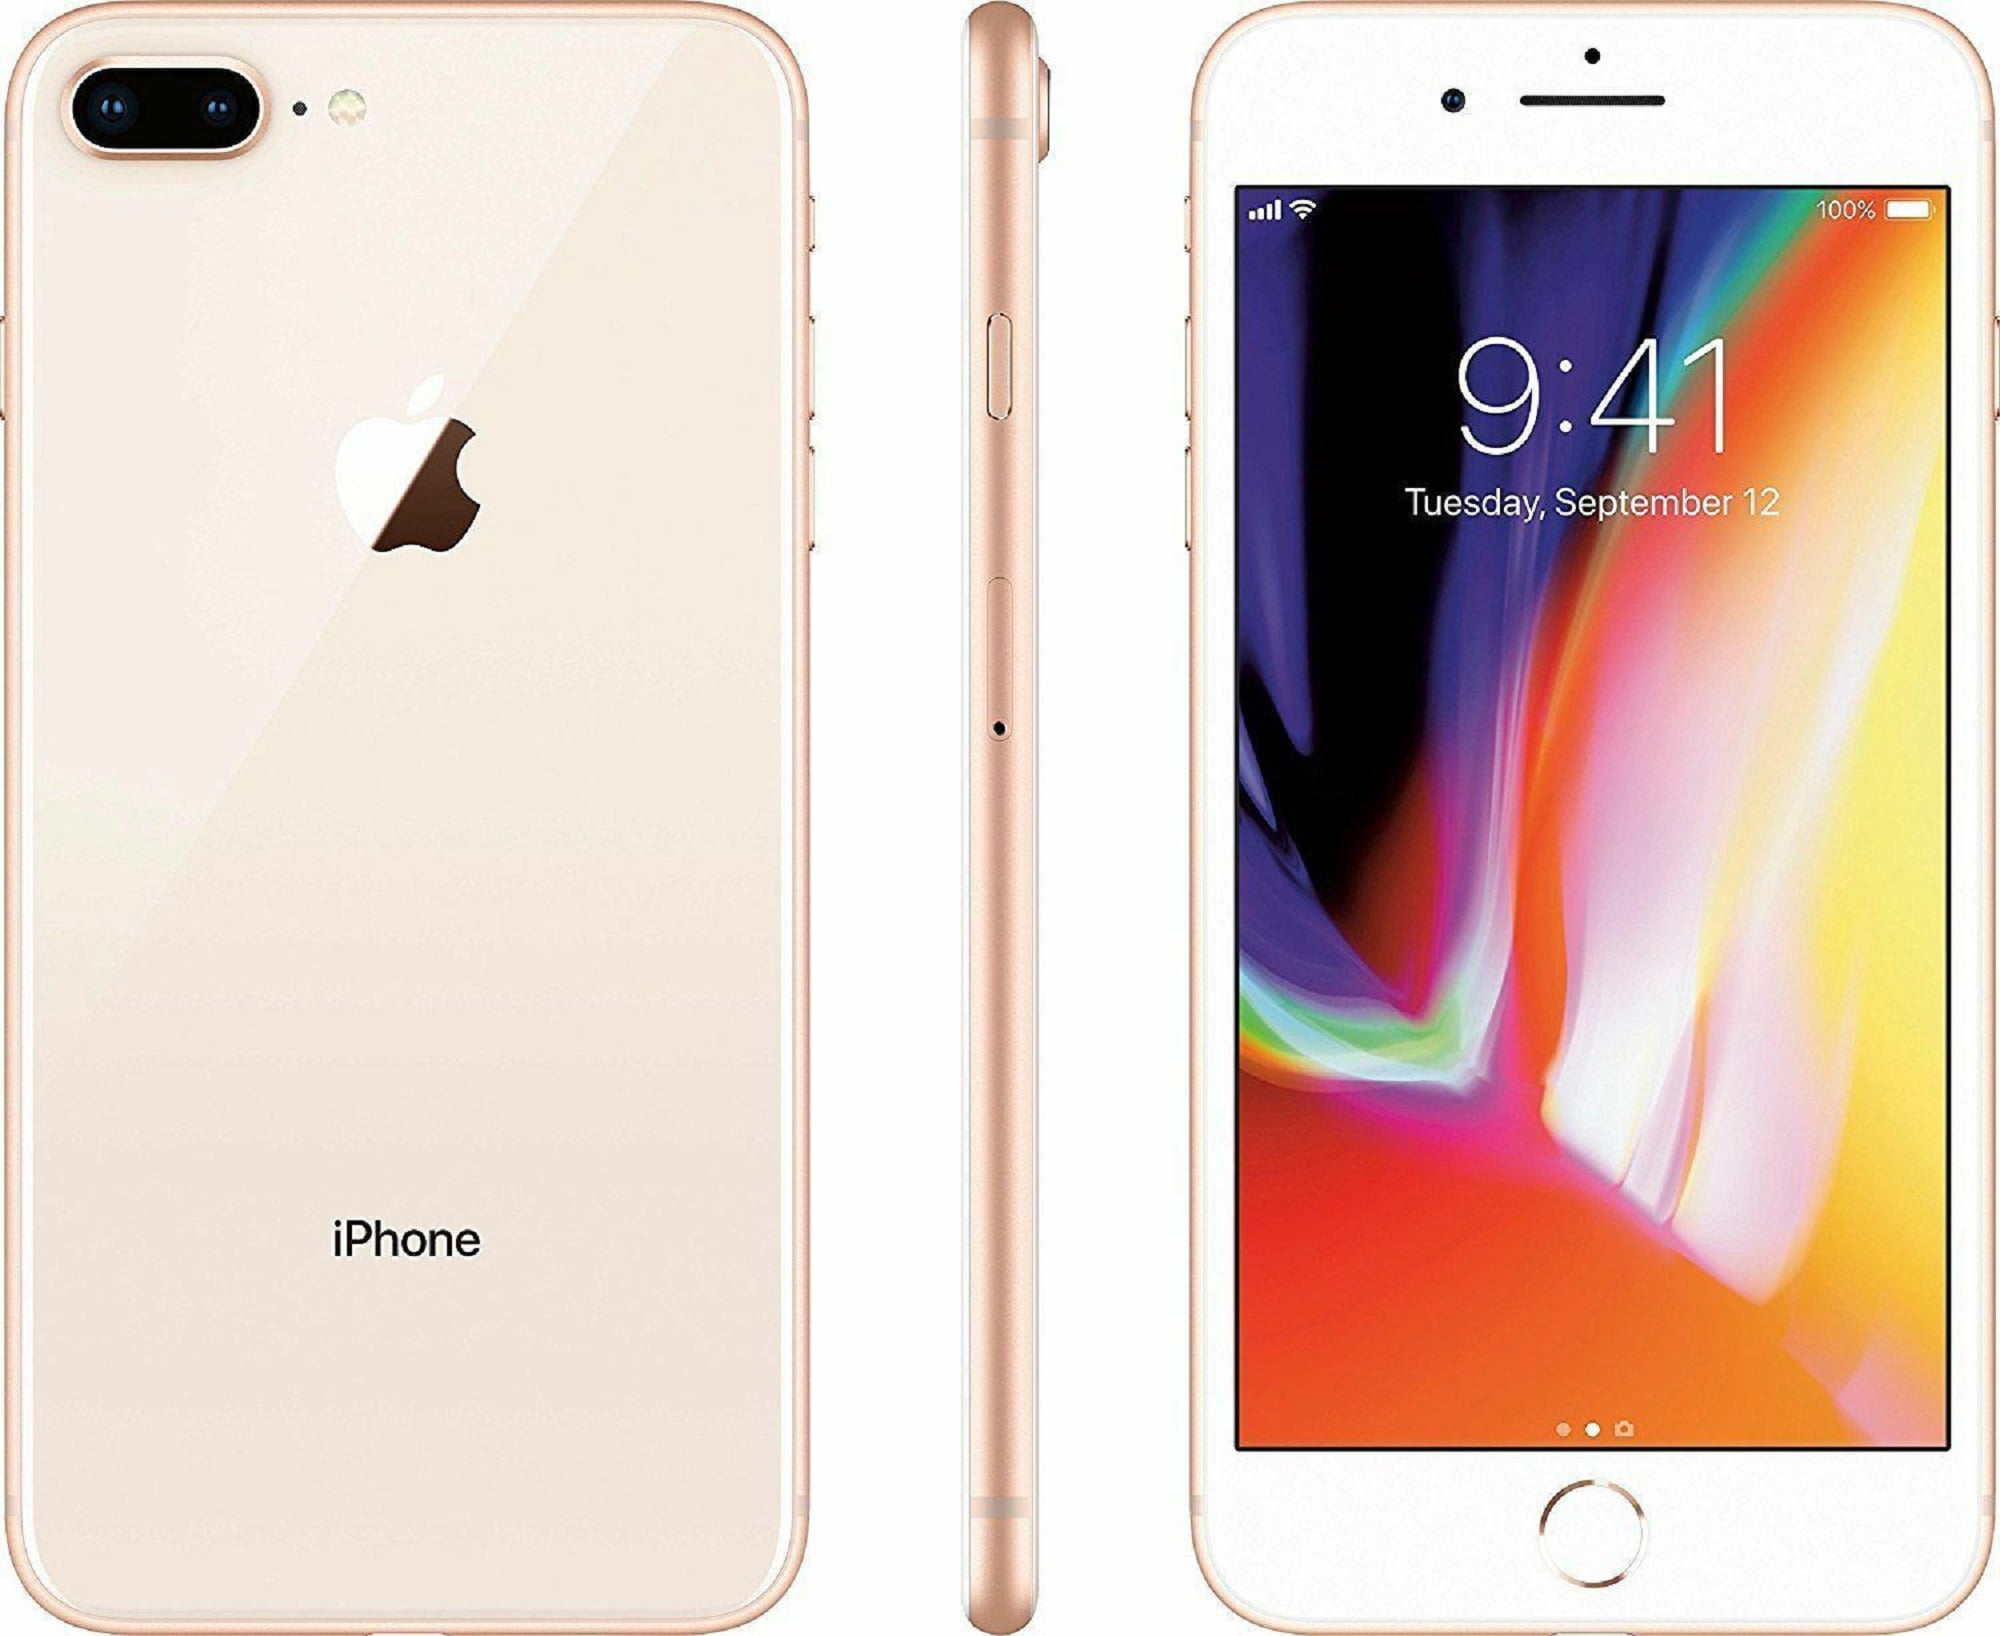 Apple iPhone 8 Plus A1897 256GB Gold (US Model) - Factory Unlocked Cell  Phone - Excellent Condition